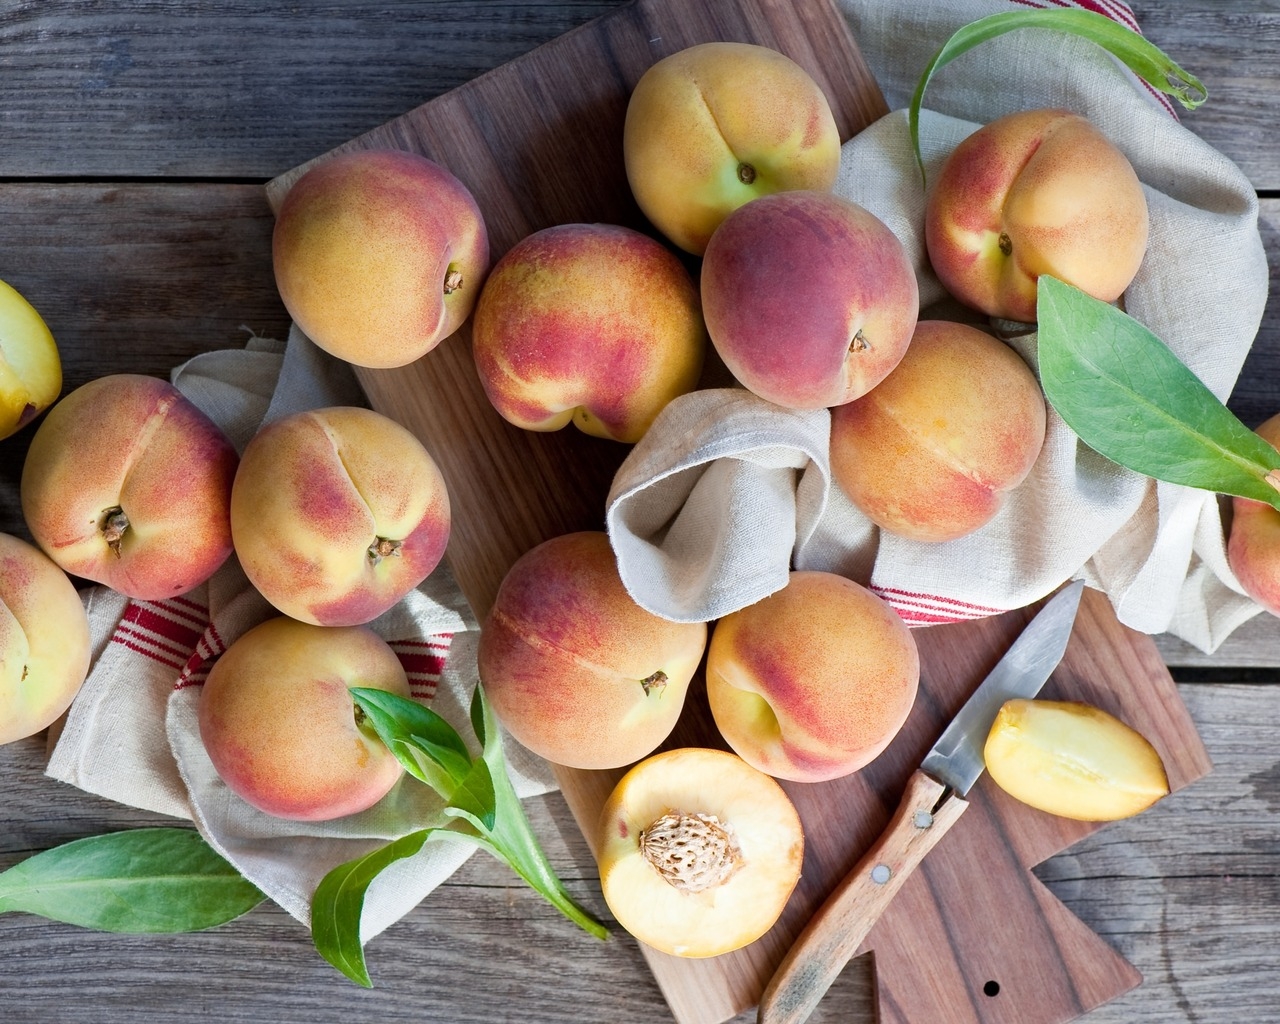 Peaches for 1280 x 1024 resolution